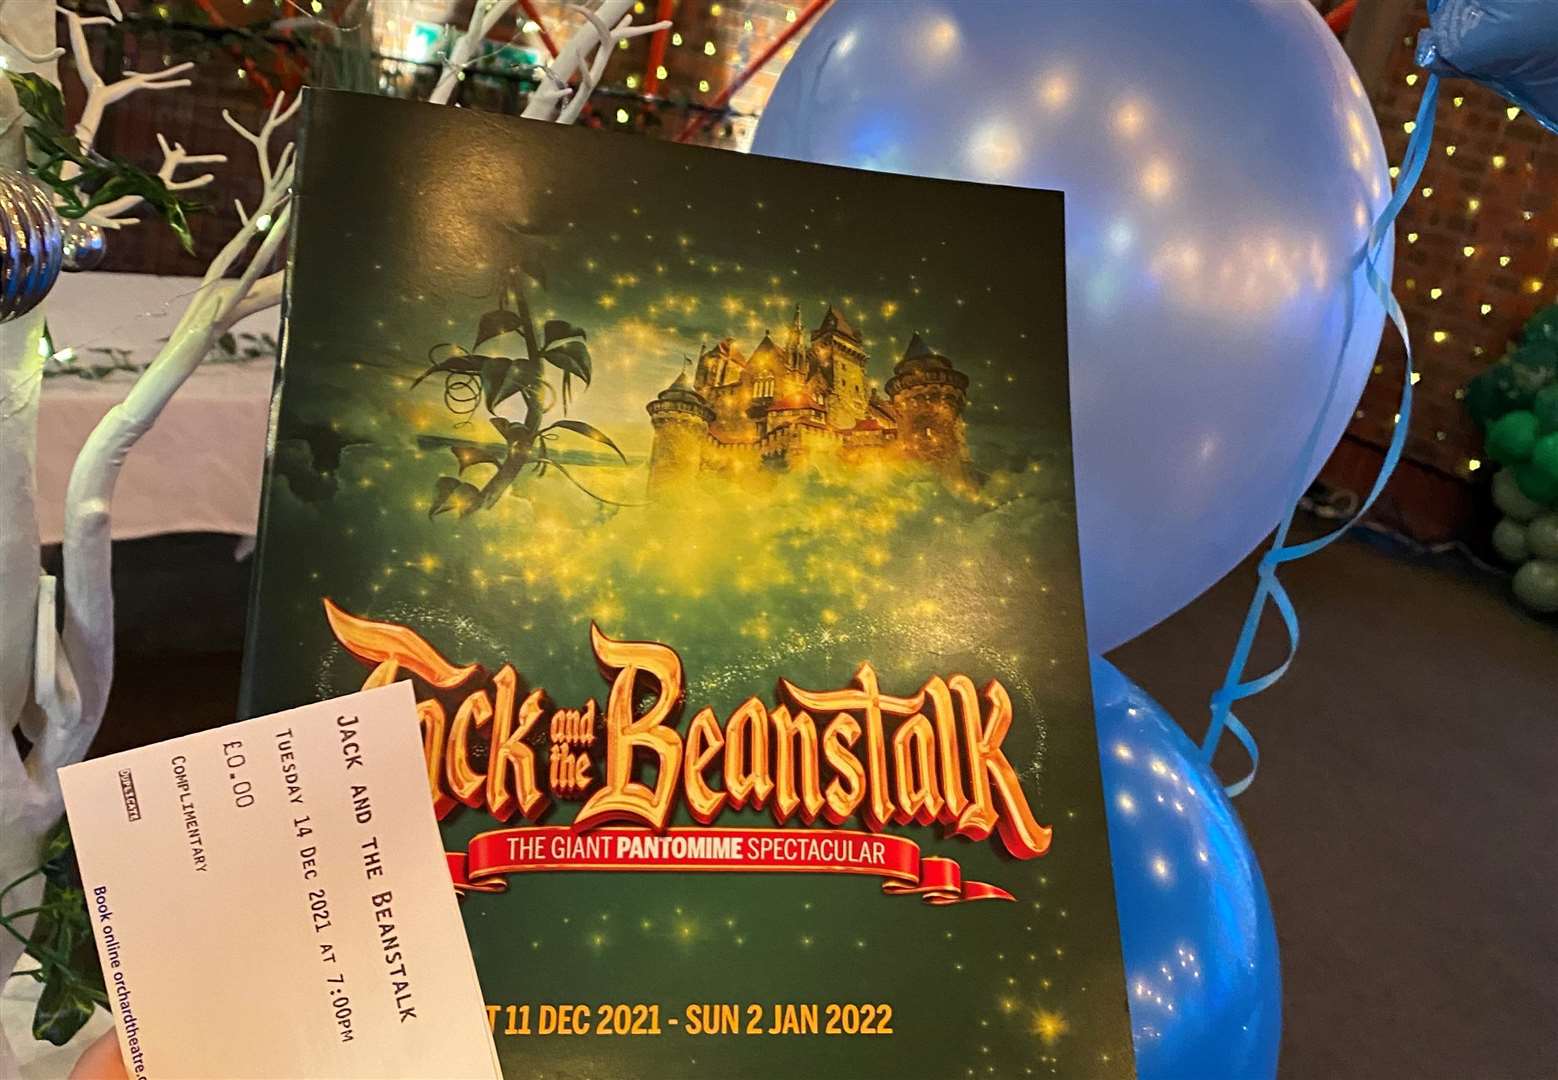 Jack and the Beanstalk is showing at The Orchard in Dartford